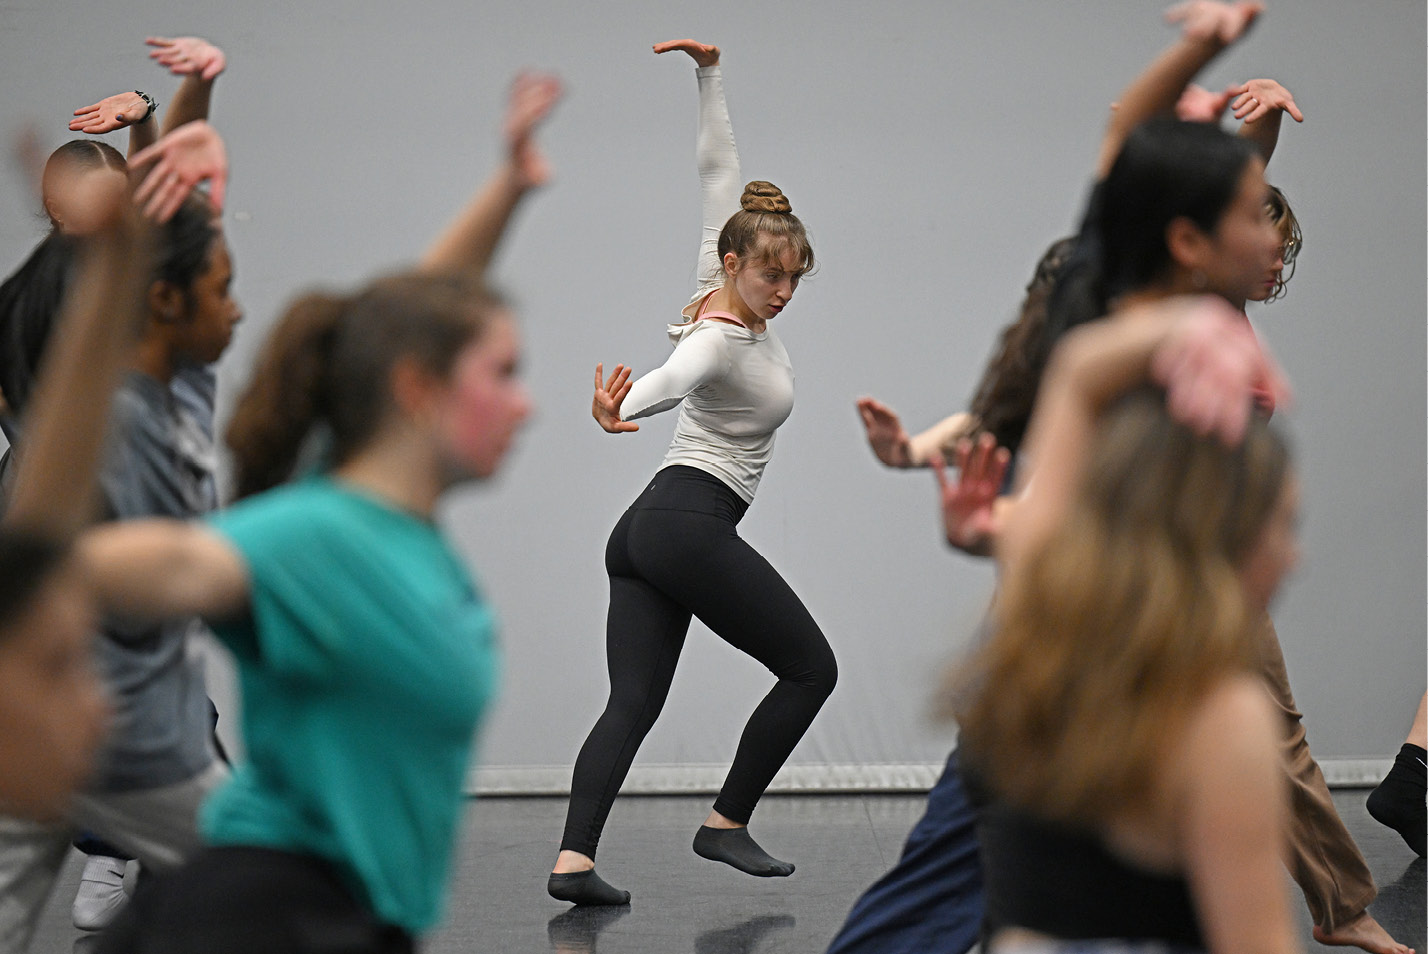 Student dances during a master class for dance students